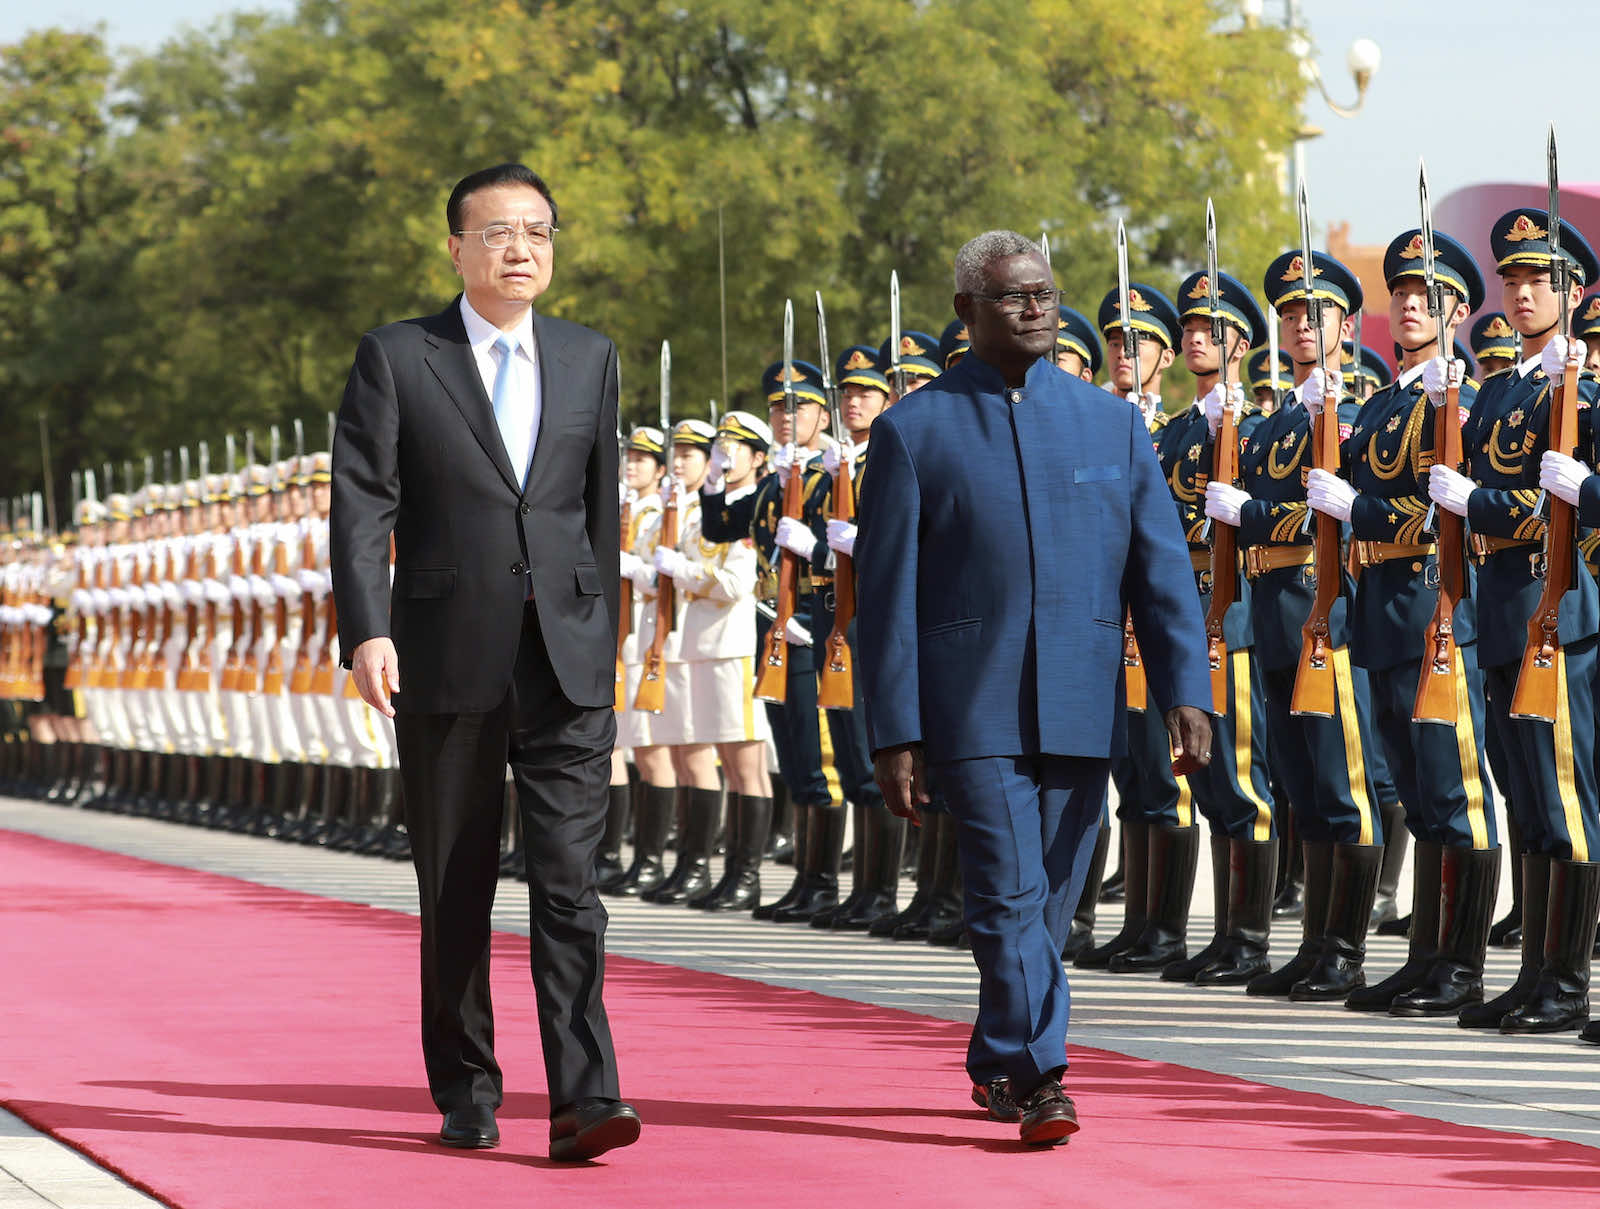 Chinese Premier Li Keqiang, left, welcomes Solomon Islands' Prime Minister Manasseh Sogavare to Beijing in October 2019 following the Solomons switch in diplomatic recognition from Taiwan (Pang Xinglei/Xinhua via Getty) 